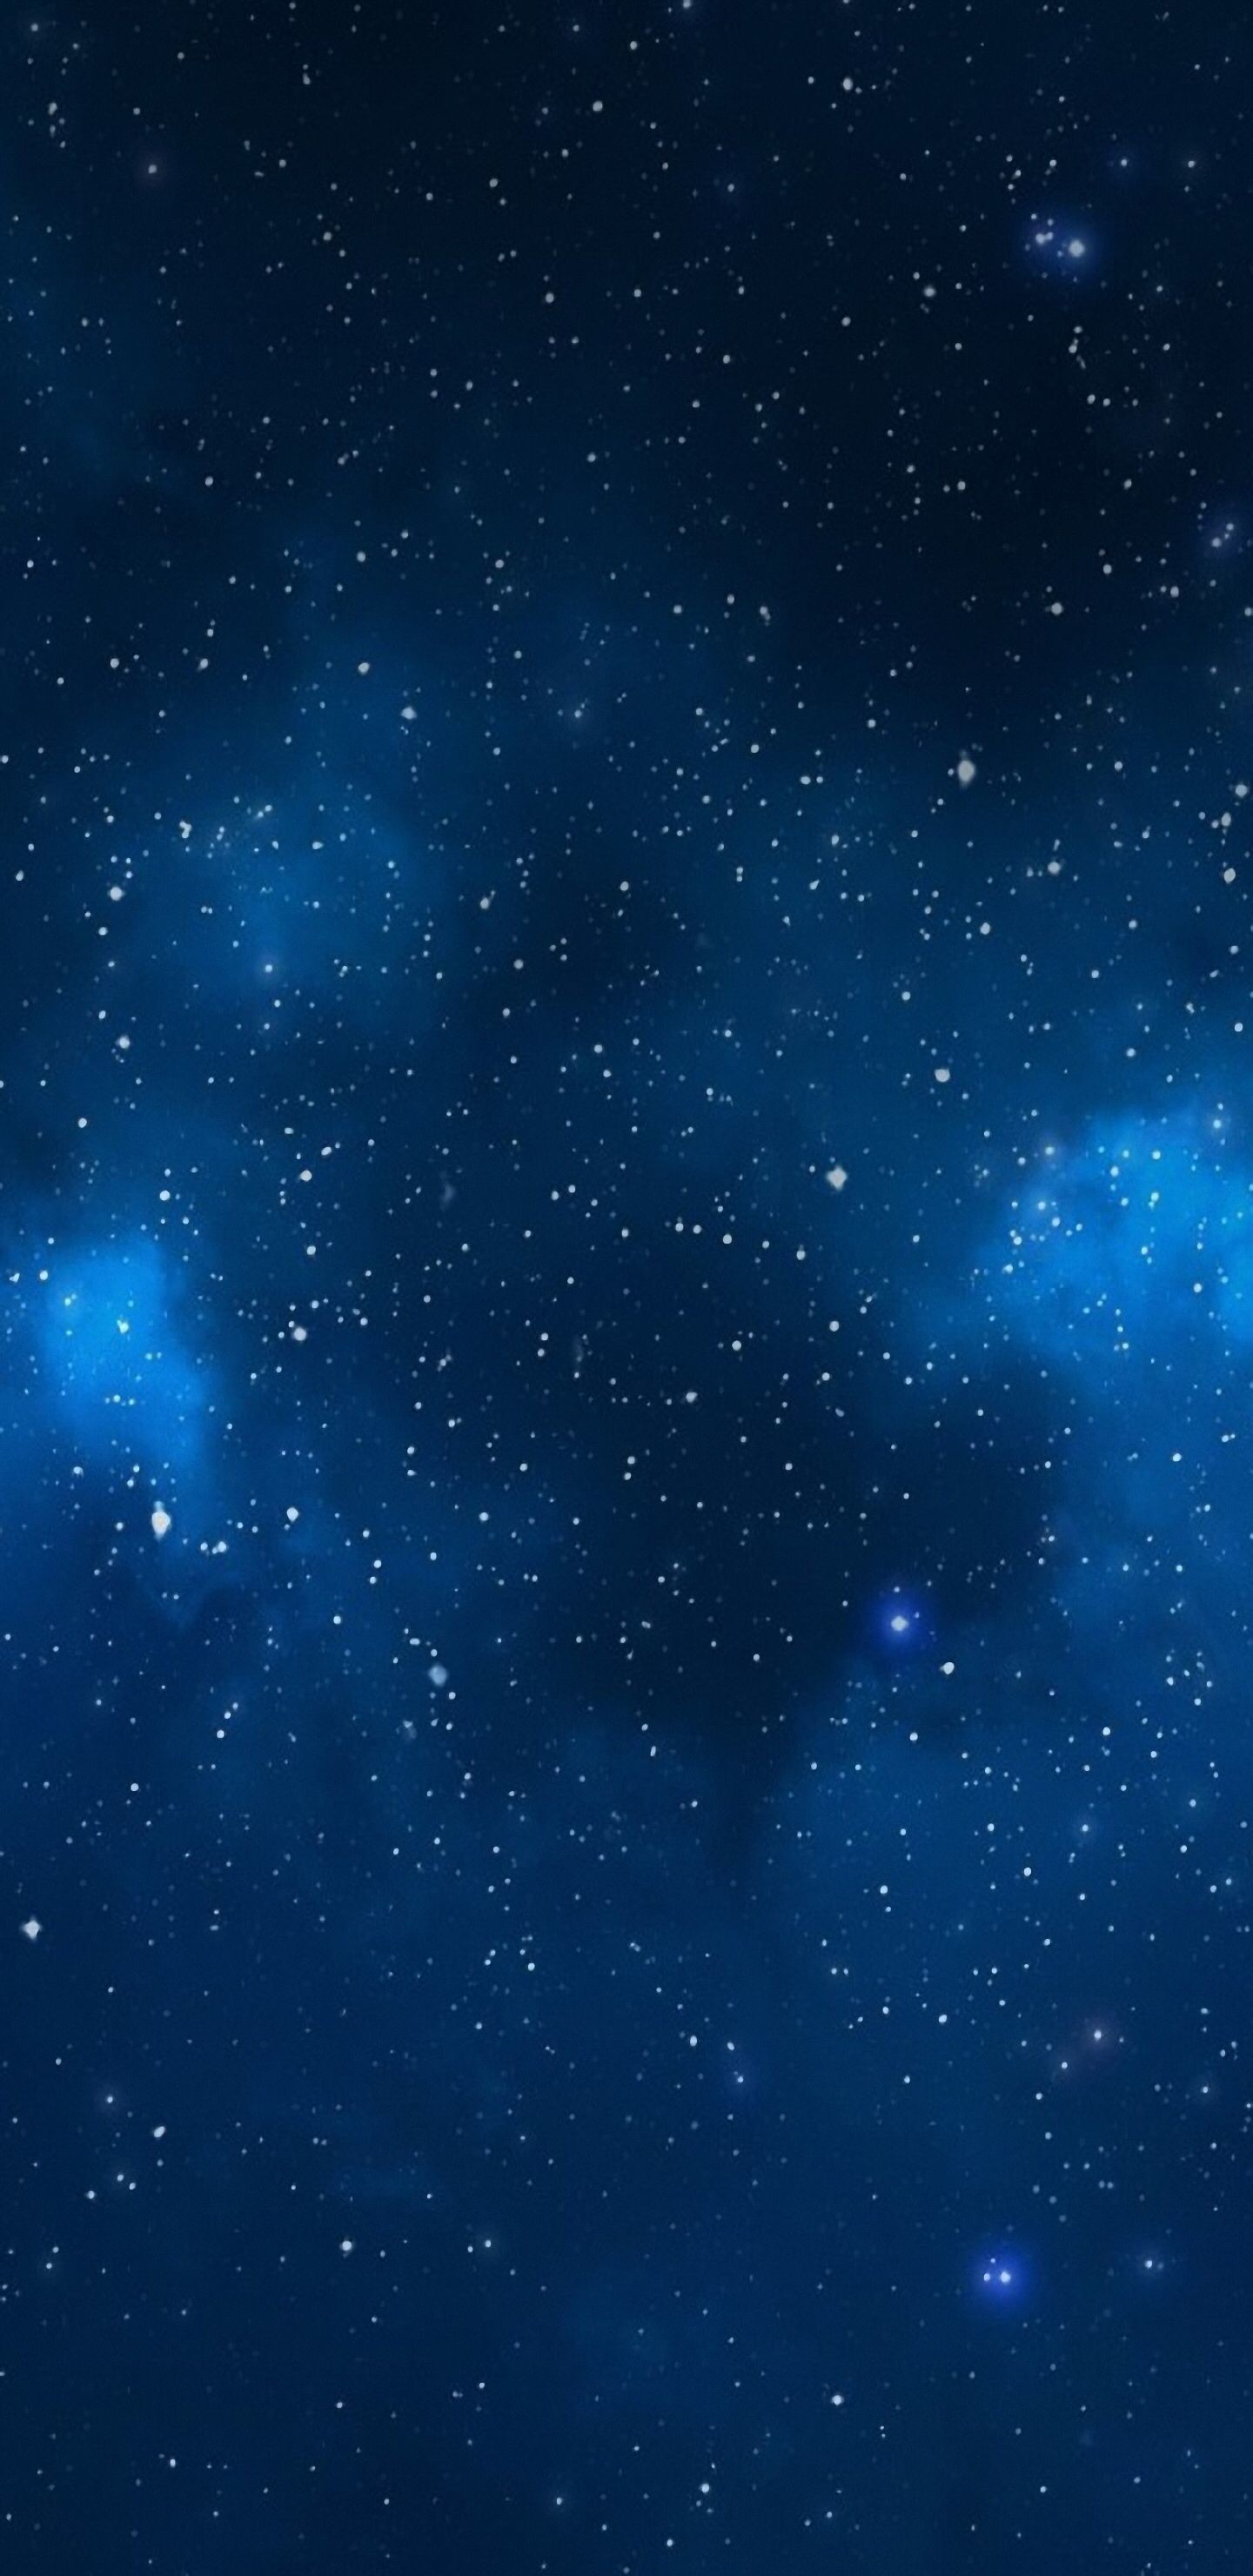  download 75 Blue Galaxy Wallpapers on WallpaperPlay 1440x2960